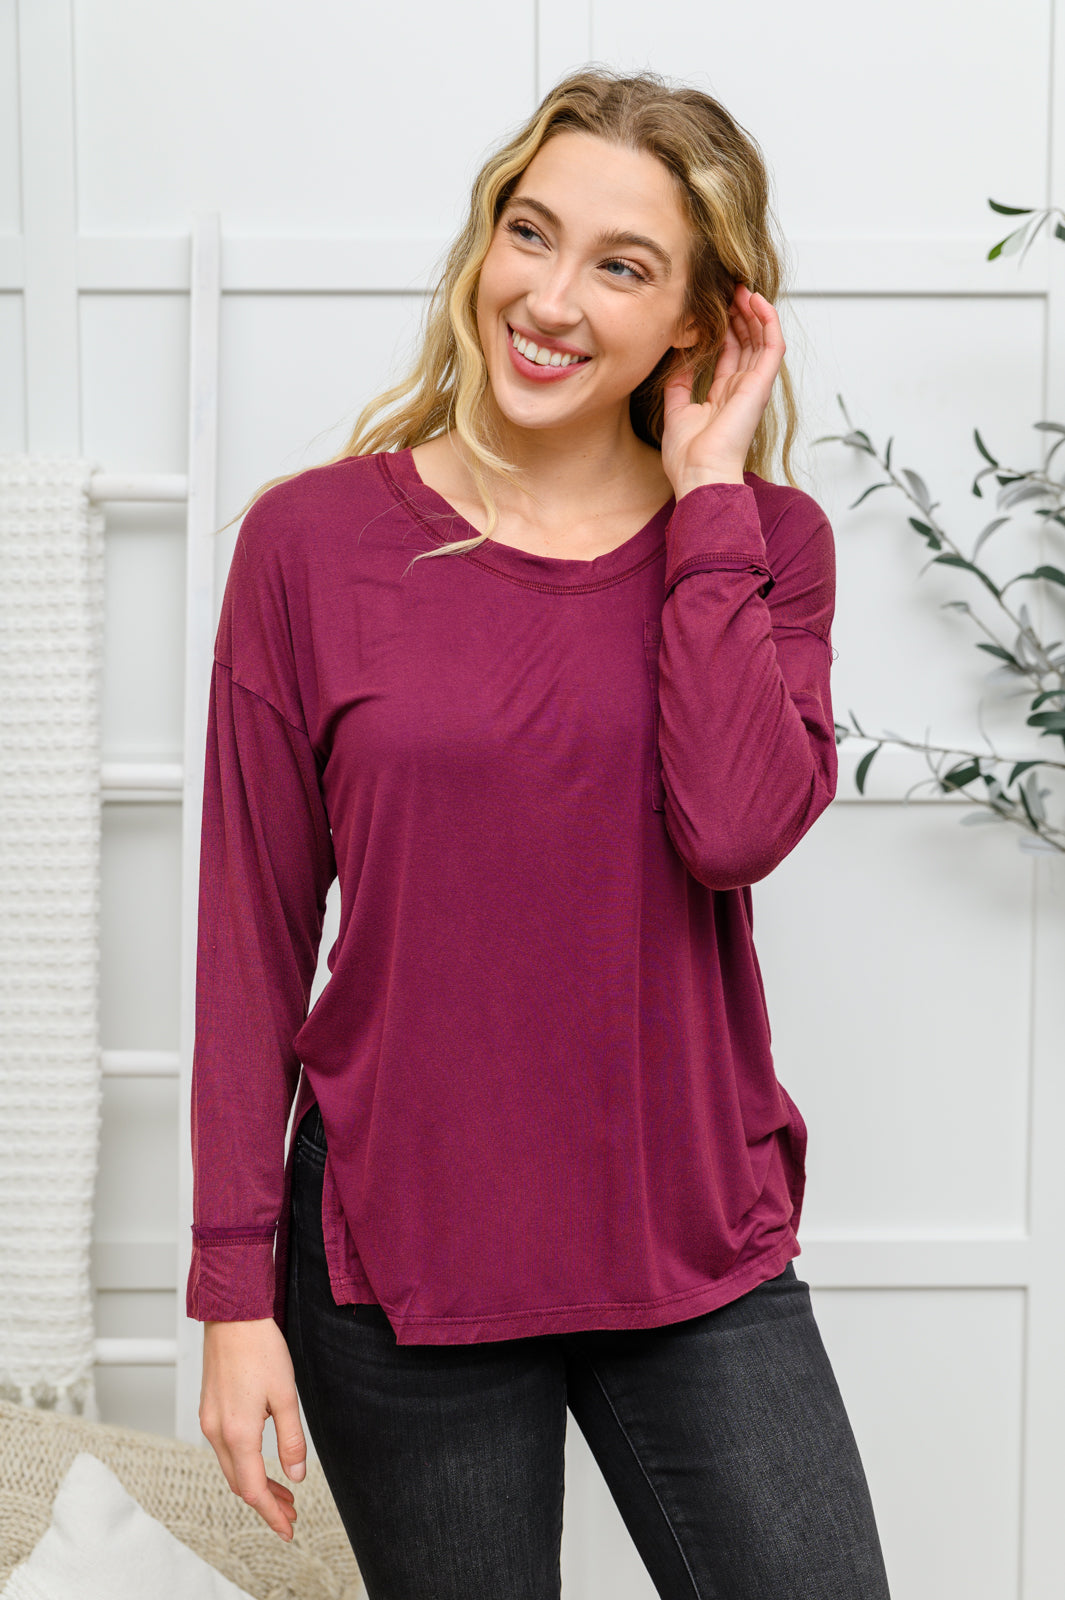 All on You Long Sleeve Knit Top With Pocket In Burgundy Burgundy S 